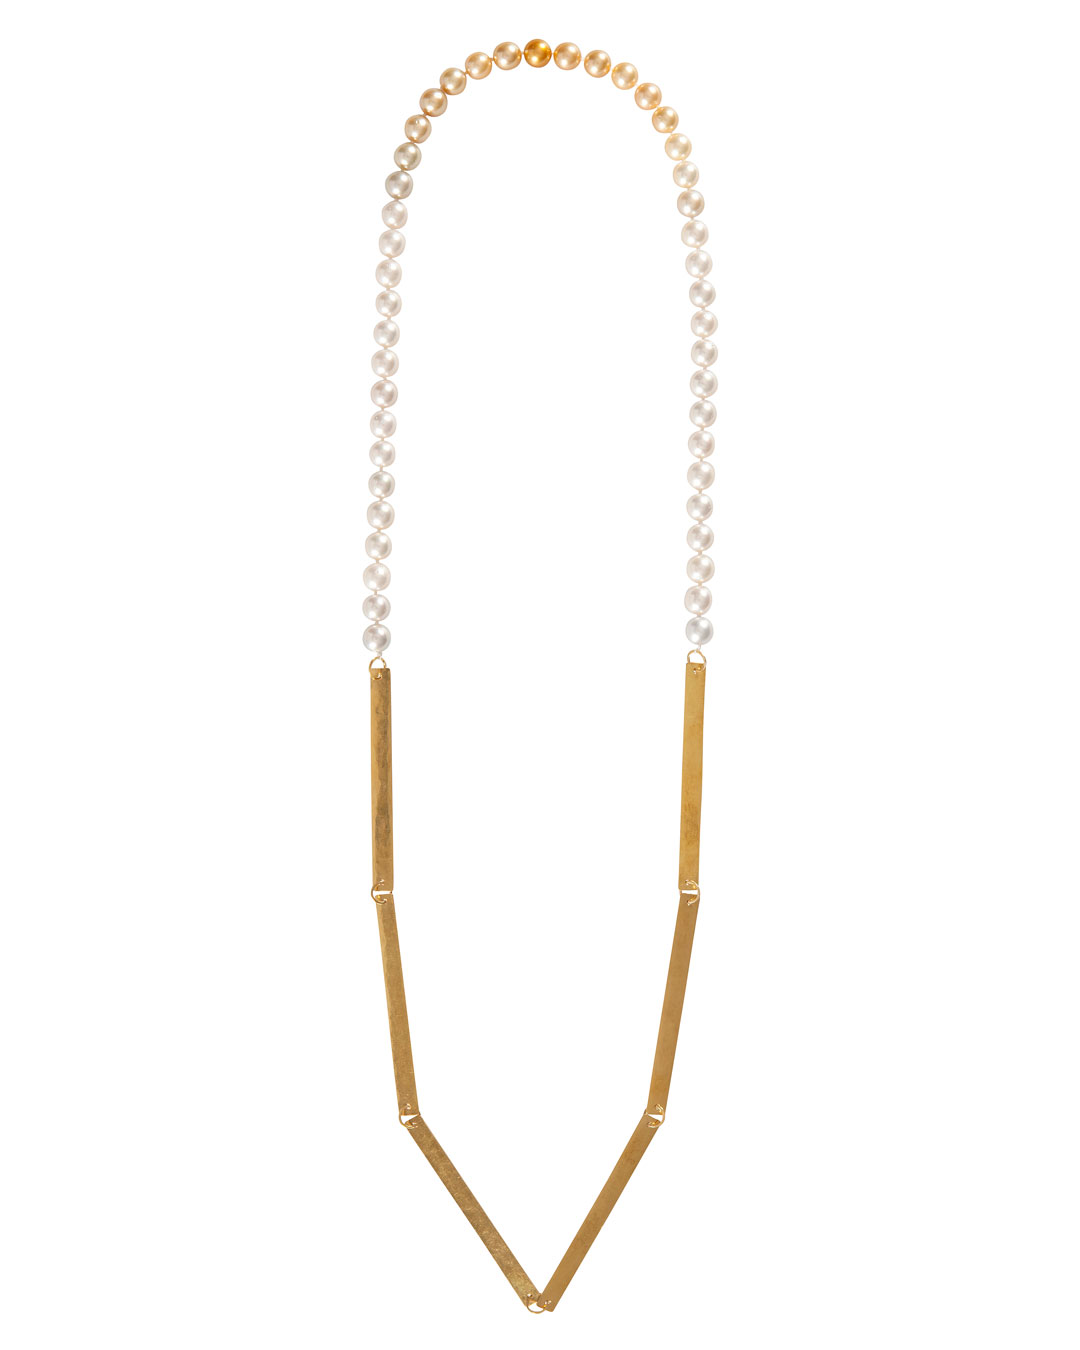 Annelies Planteijdt, Mooie stad – Collier en Chanel no.19 (Beautiful City - Necklace with Chanel no.19), 2017, necklace, gold, South Sea pearls, 150 x 360 mm, price on request (image 2/3)